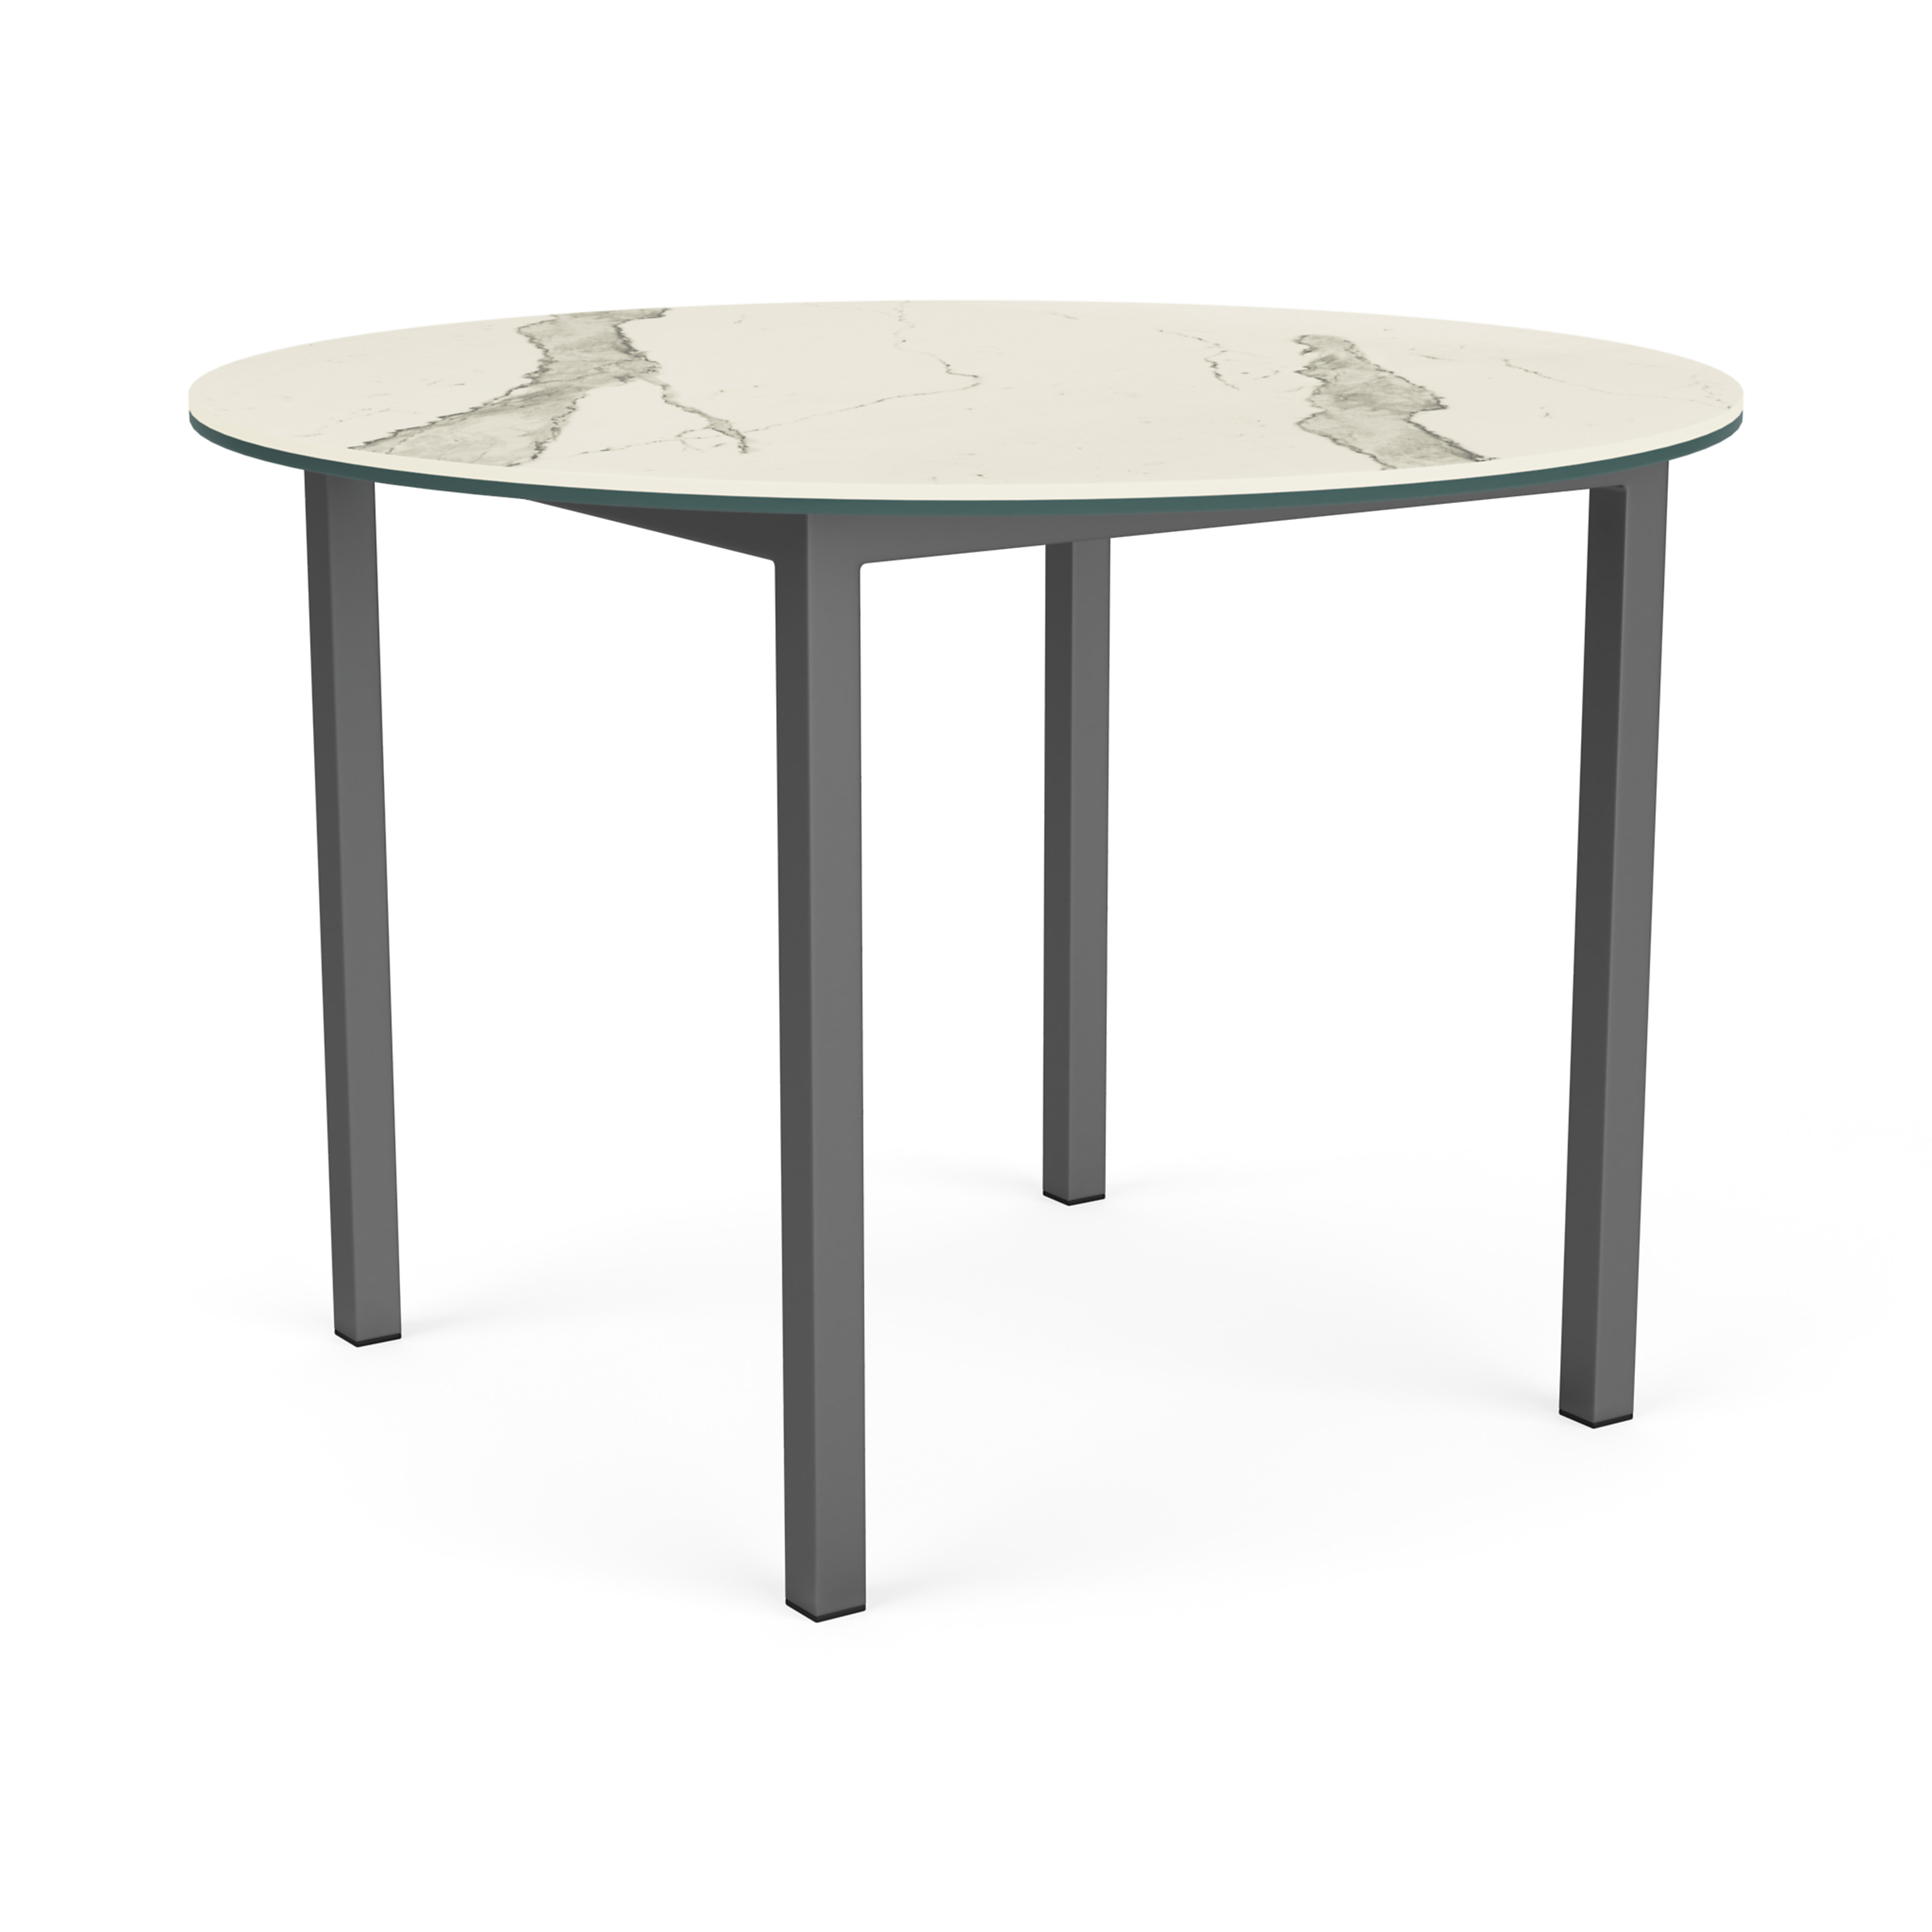 Parsons 42 diam 1.5" Outdoor Table in Graphite with Ceramic Top in Marbled White